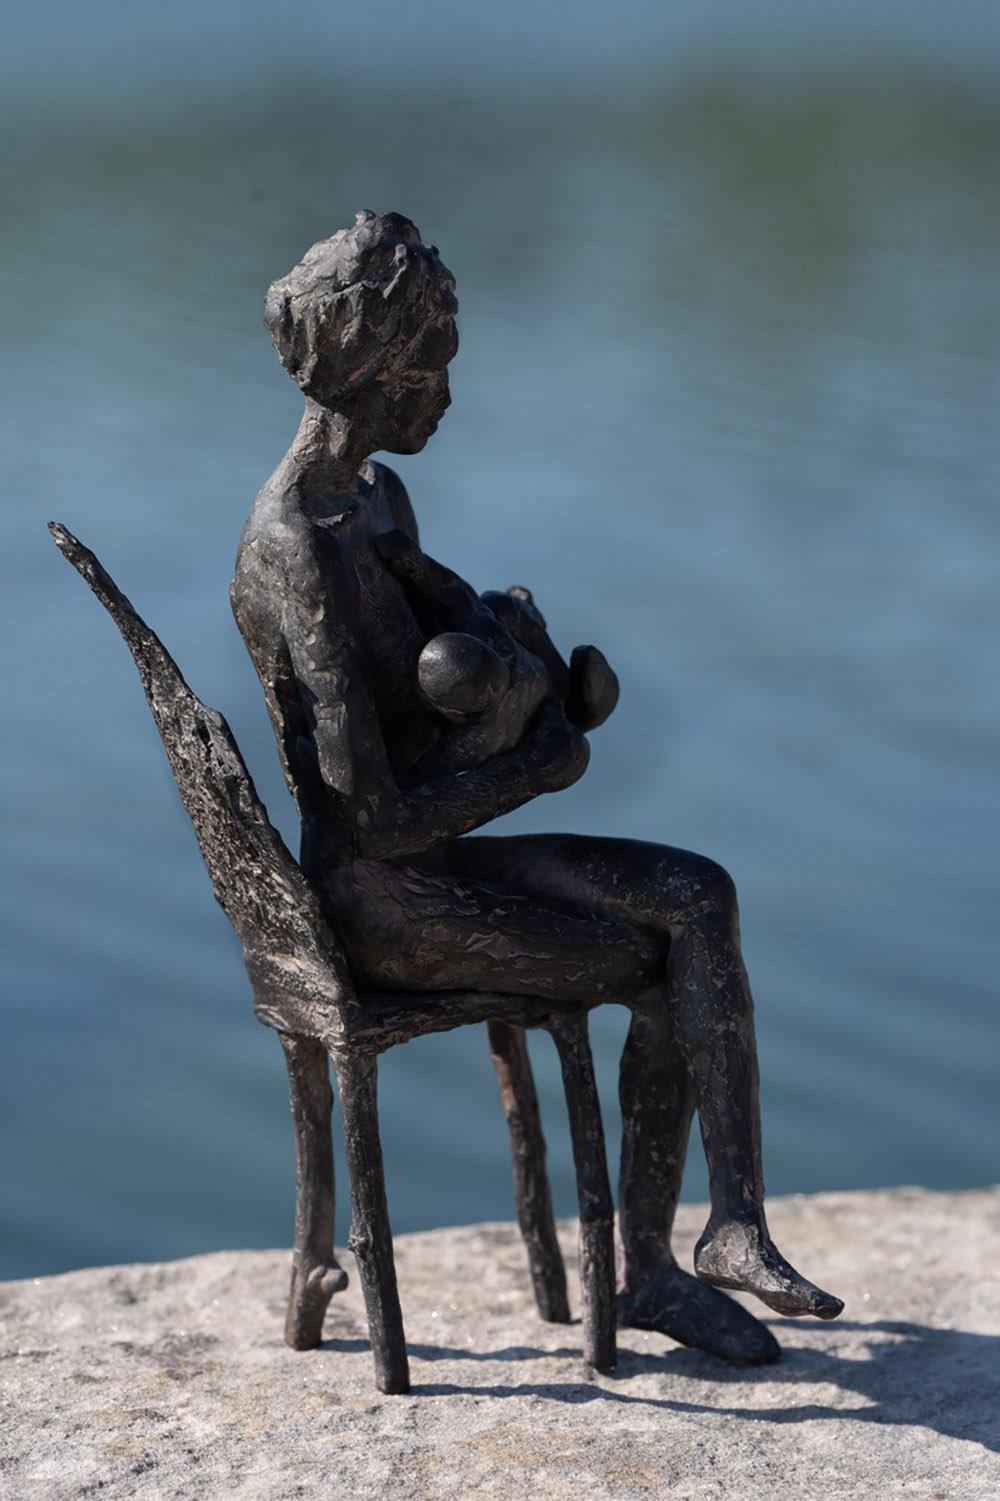 The Early Morning by Marine de Soos - Bronze sculpture, mother and child, family For Sale 1